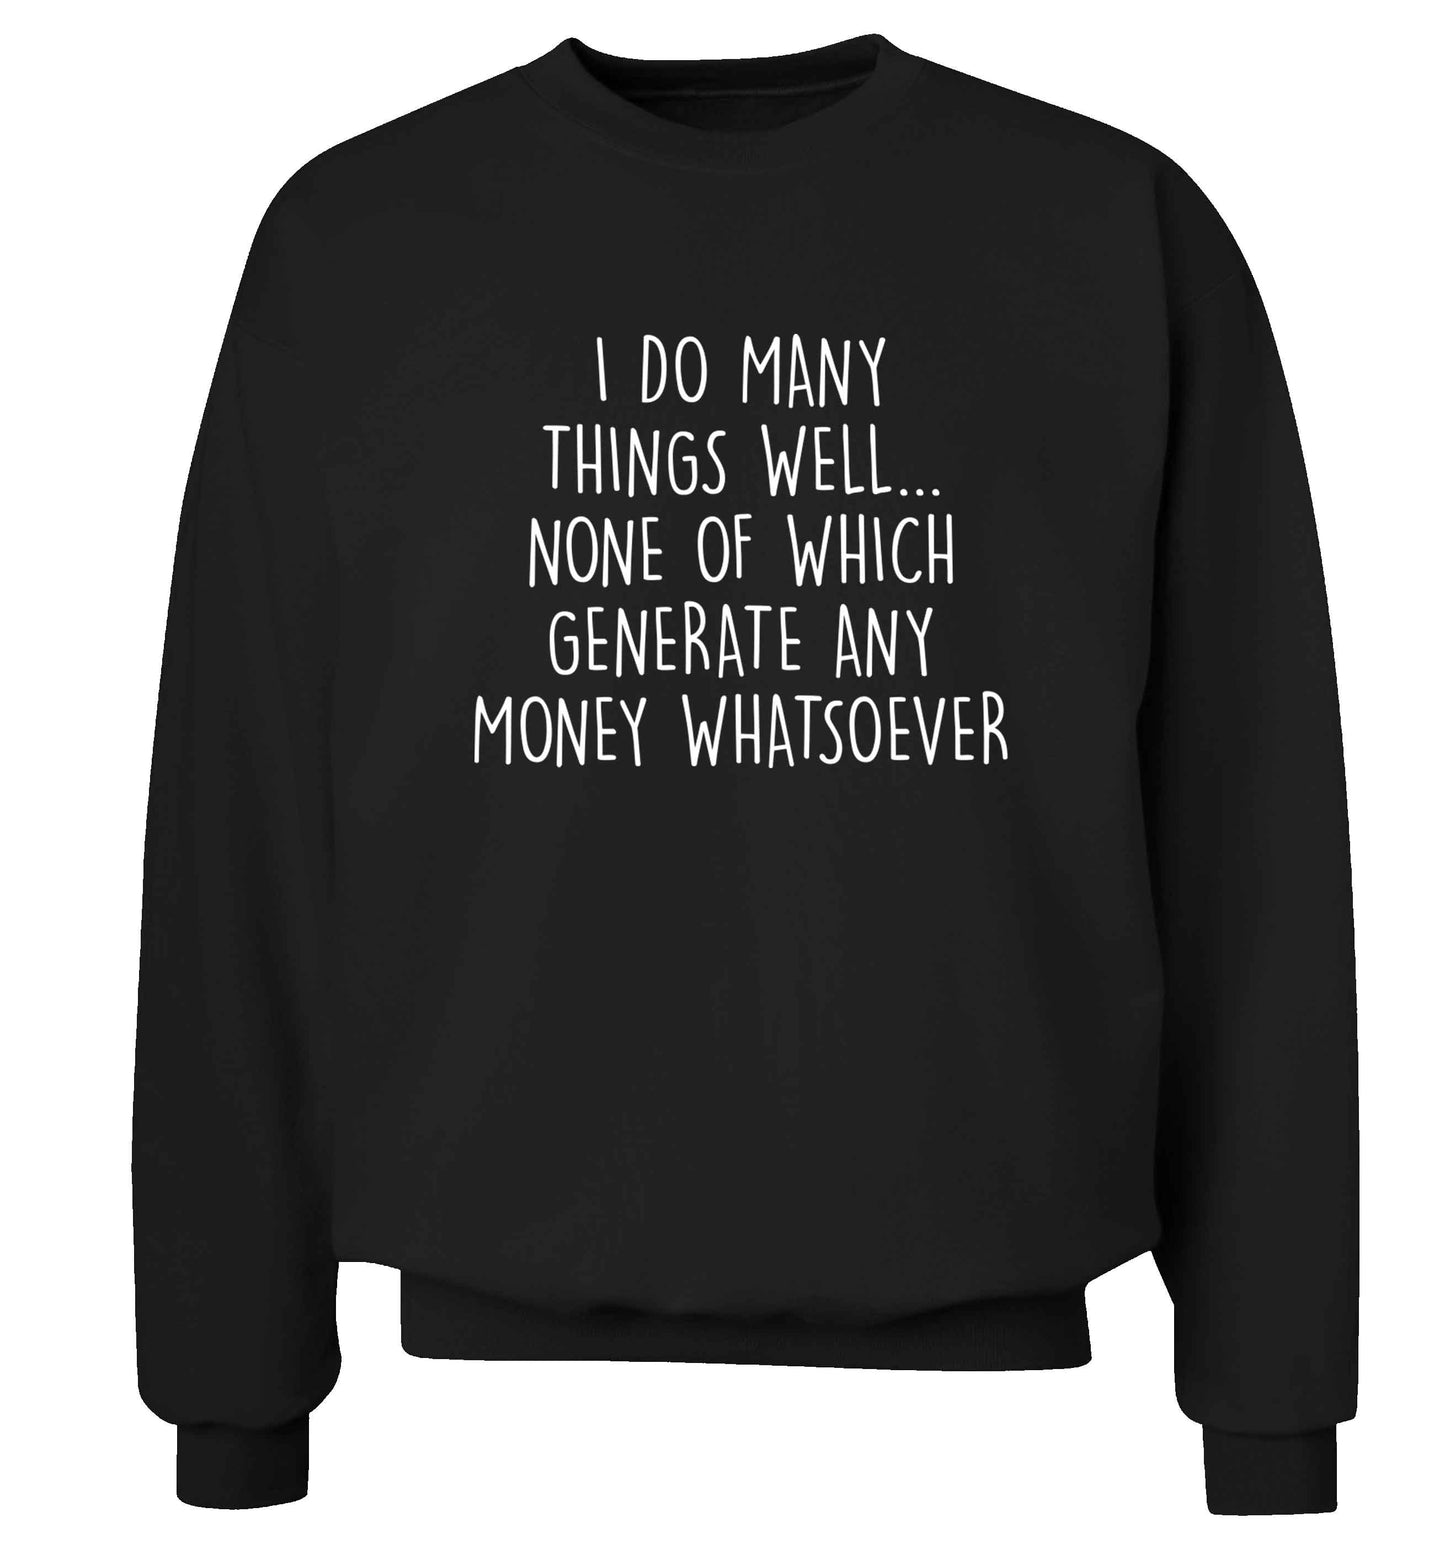 I do many things well none of which generate income Adult's unisex black Sweater 2XL